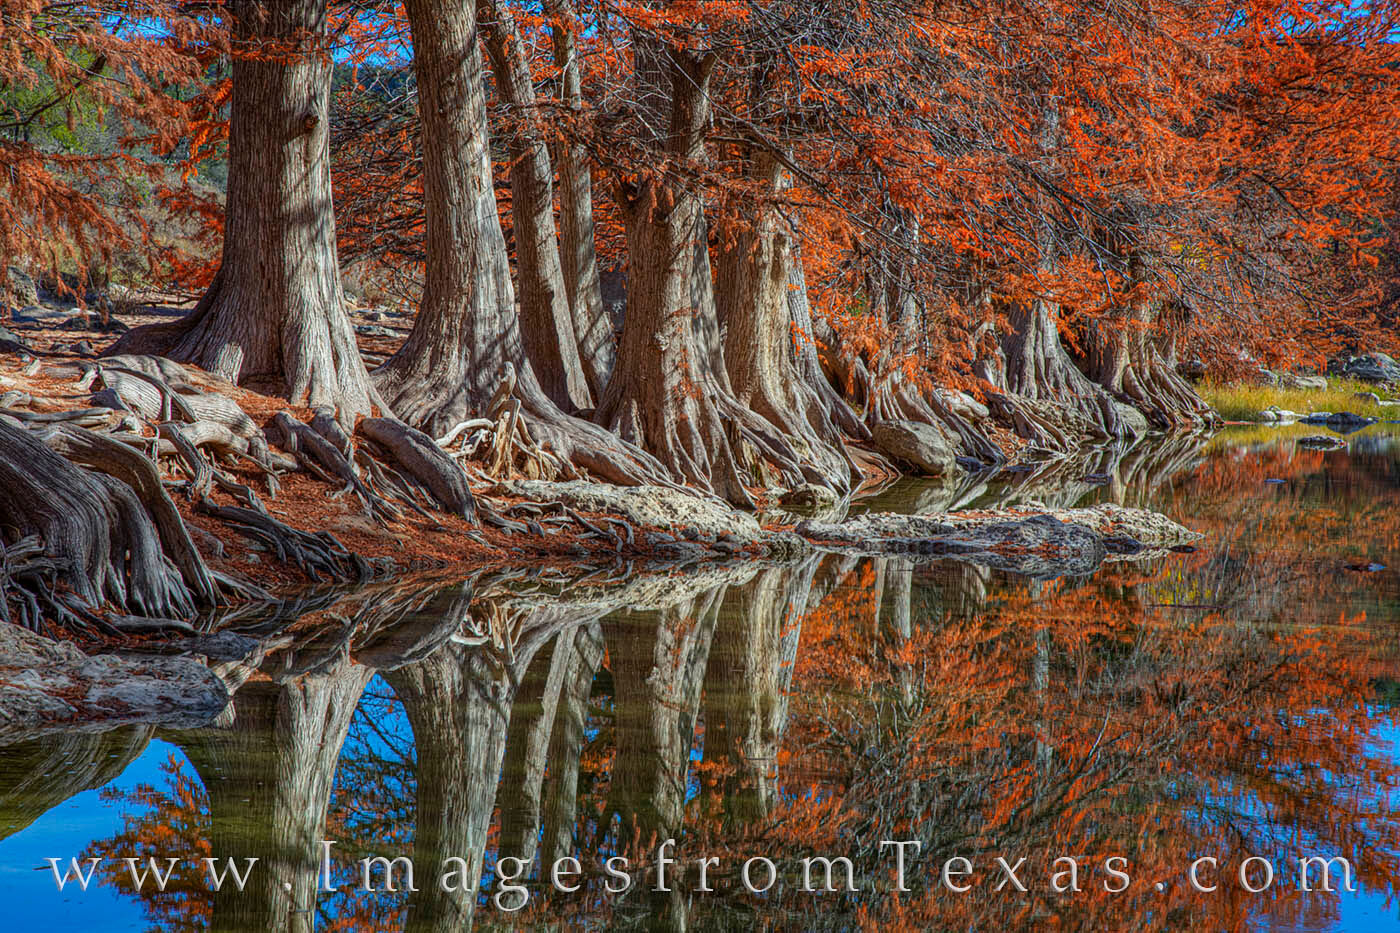 Fall color and twisted cypress roots make for a beautiful and unique photograph in morning light of a late November day.